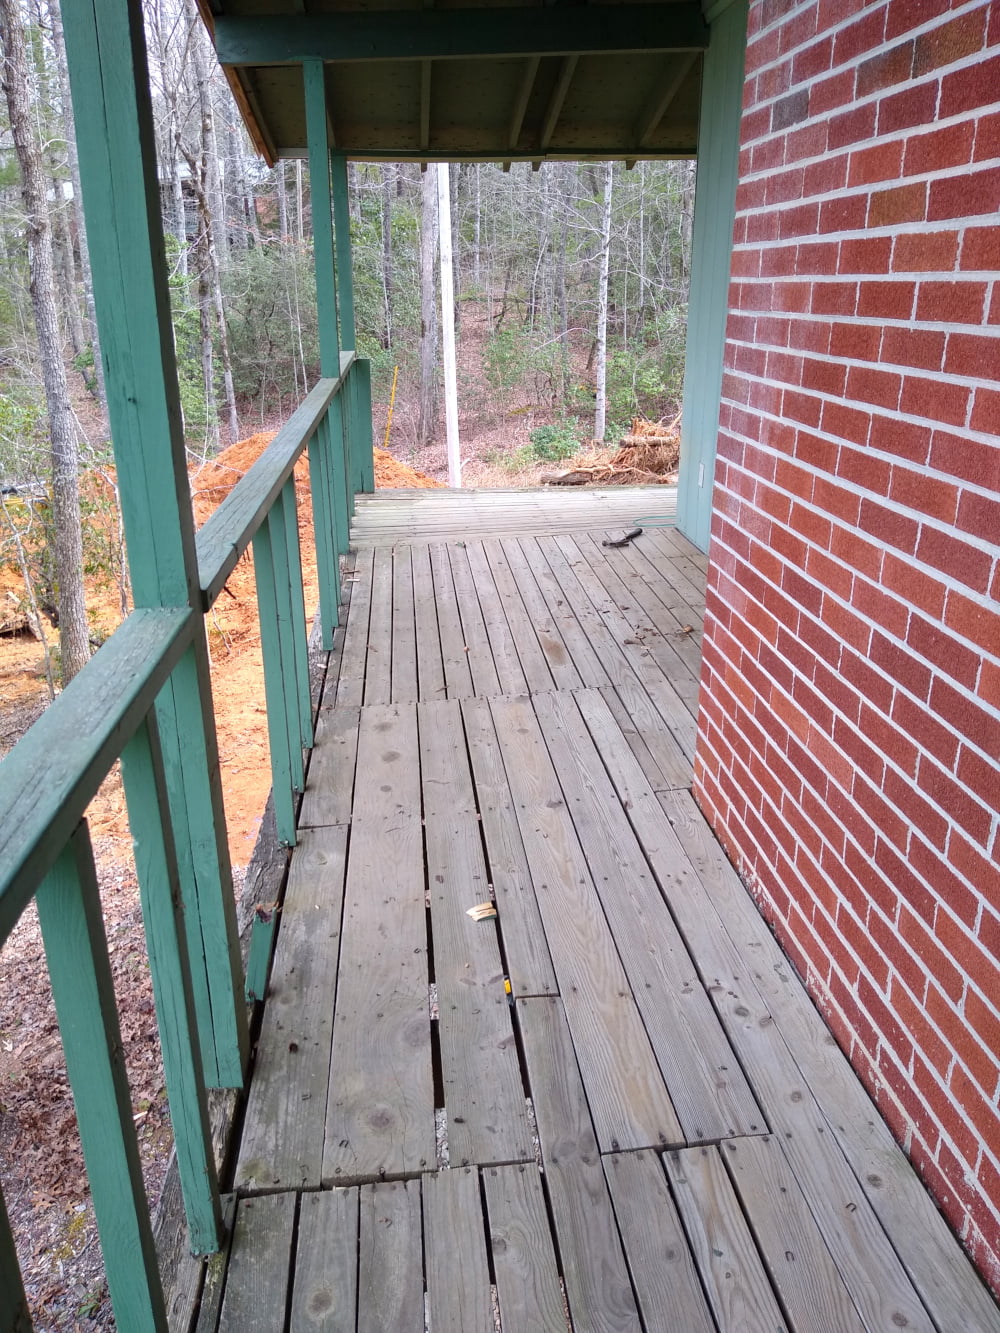 Back deck cleared and ready for demo